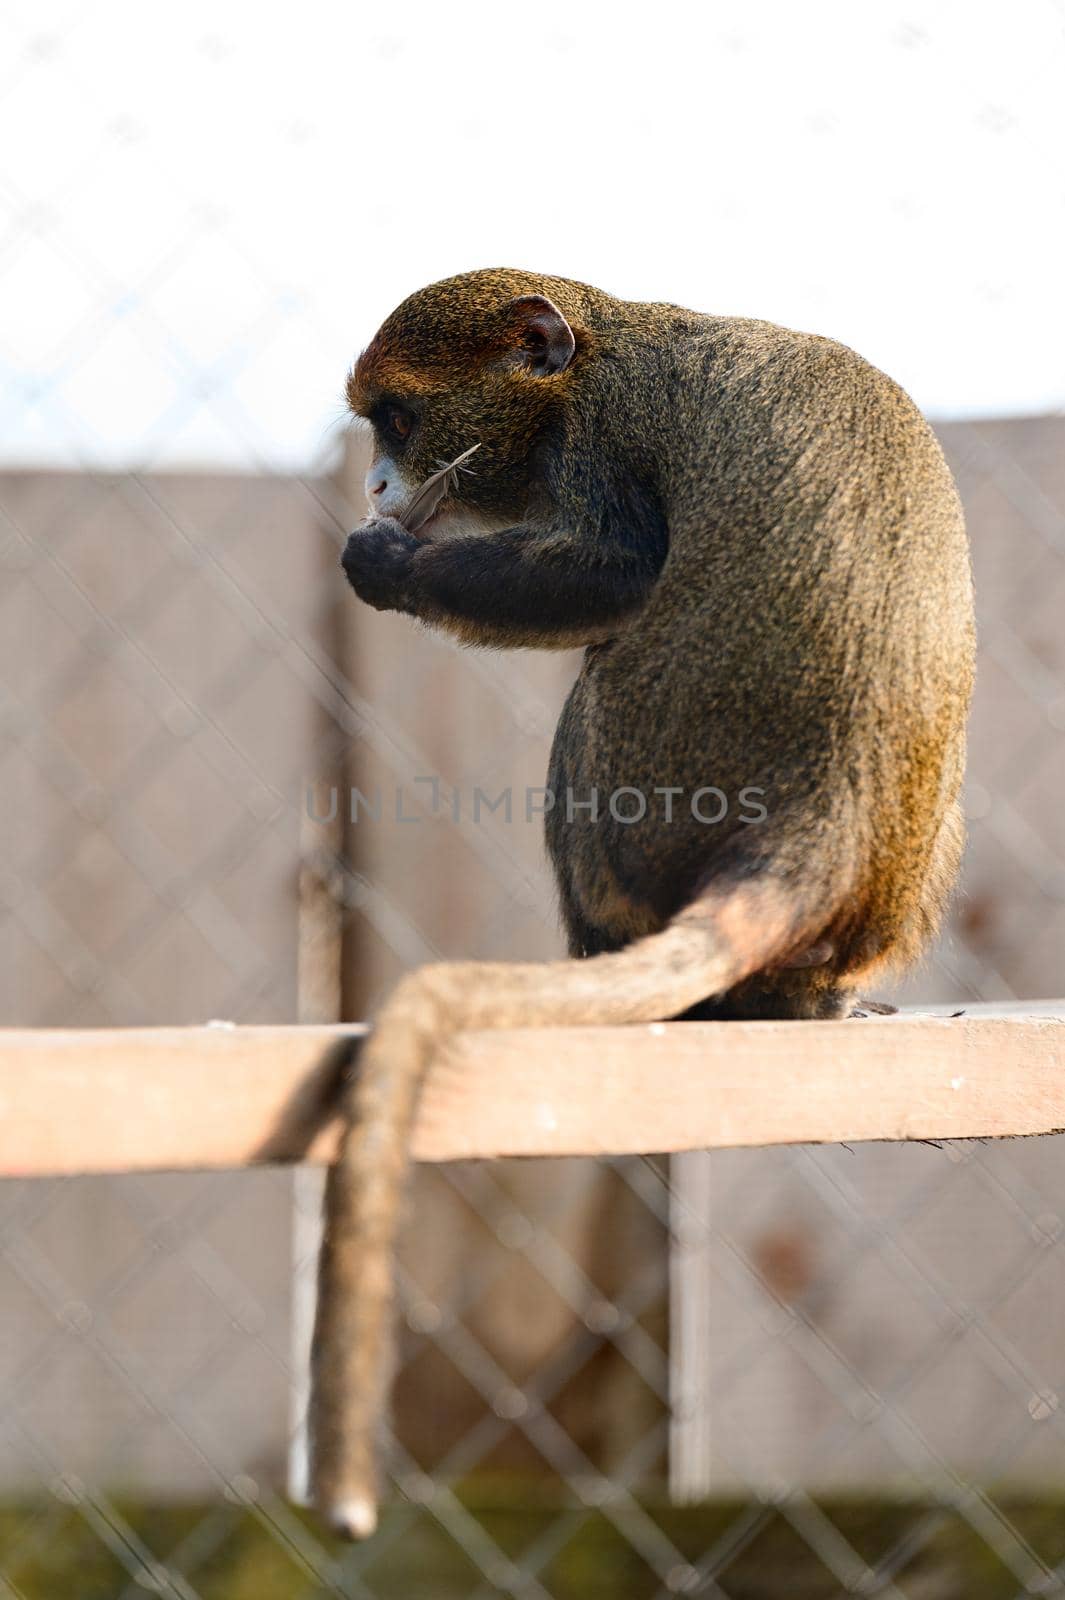 De Brazza monkey Cercopithecus zanectus from Africa in captivity, isolated moth in a zoo. by Niko_Cingaryuk